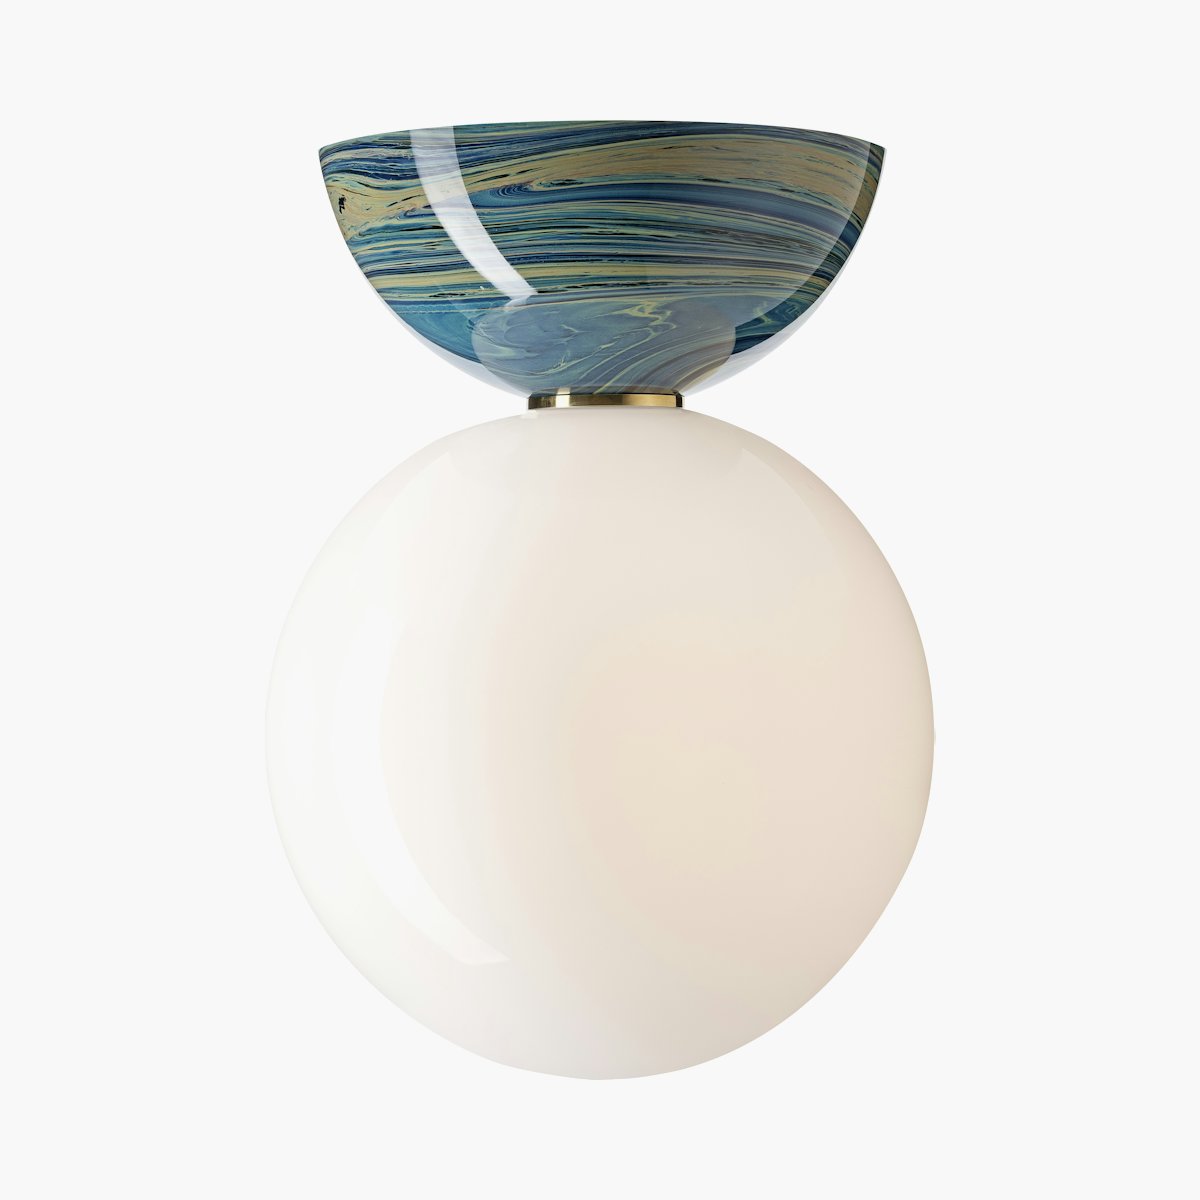 Spacey Full Moon Ceiling Light